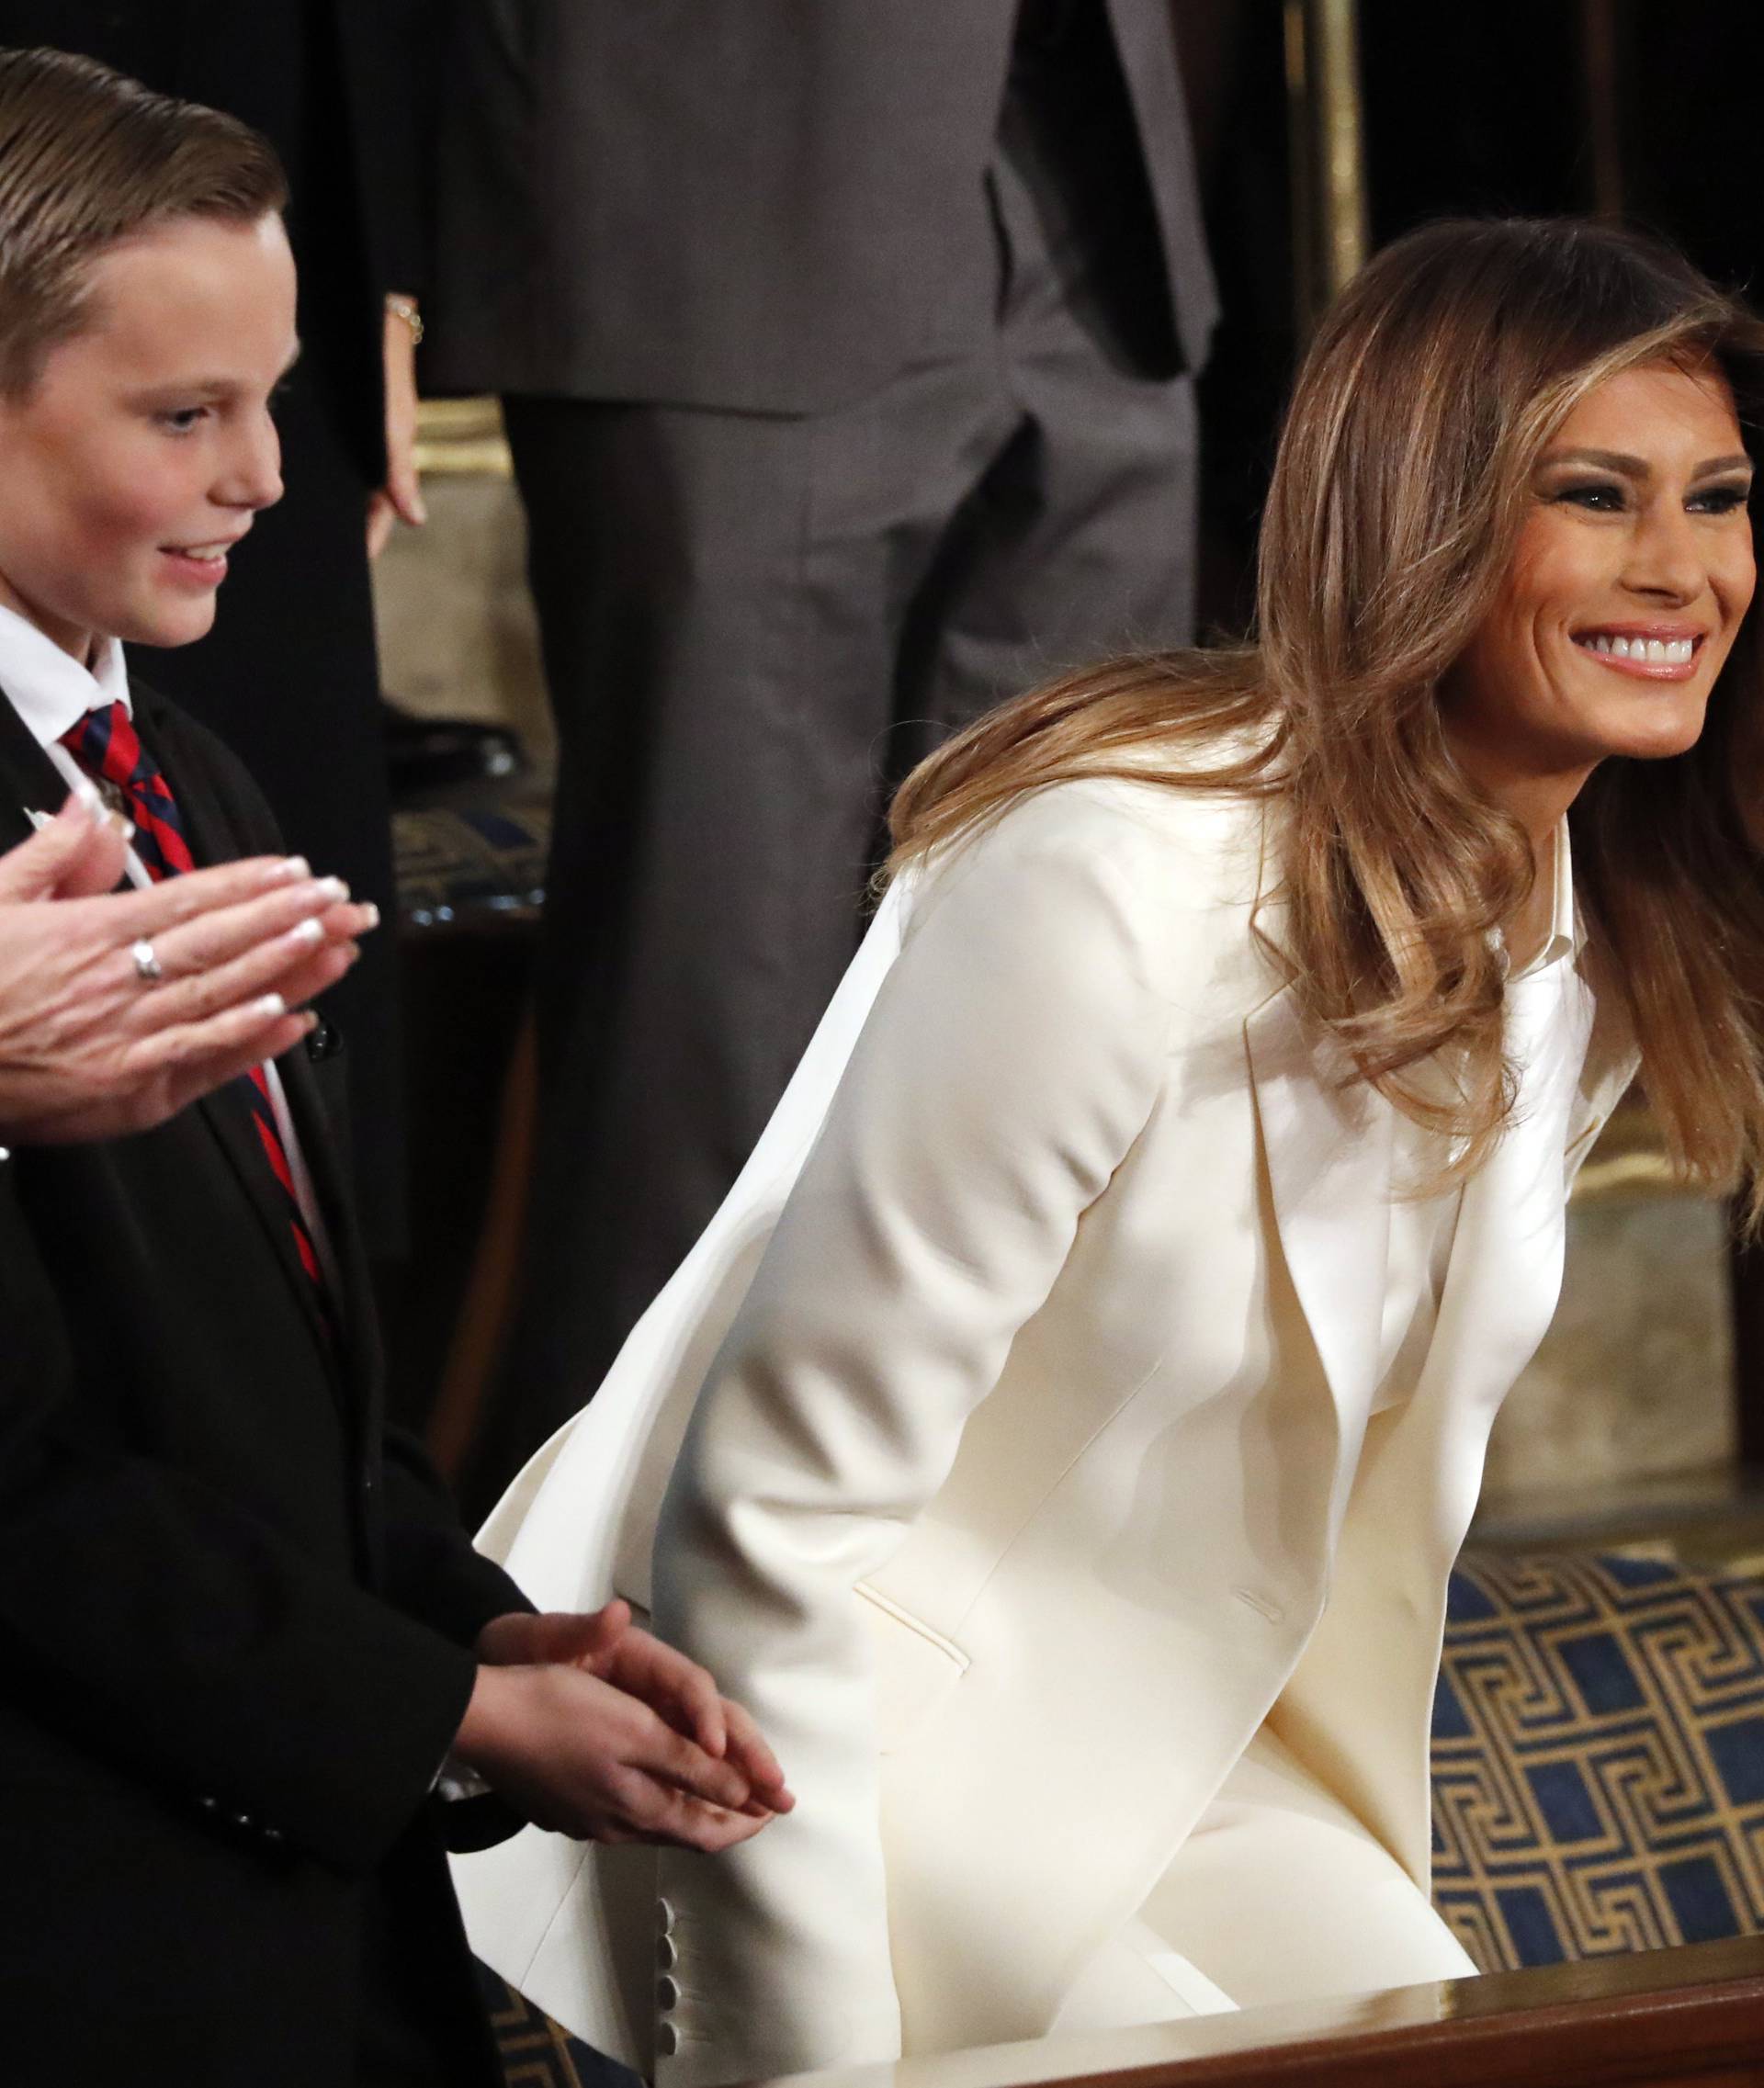 Melania Trump attends President Trump's State of the Union address in Washington